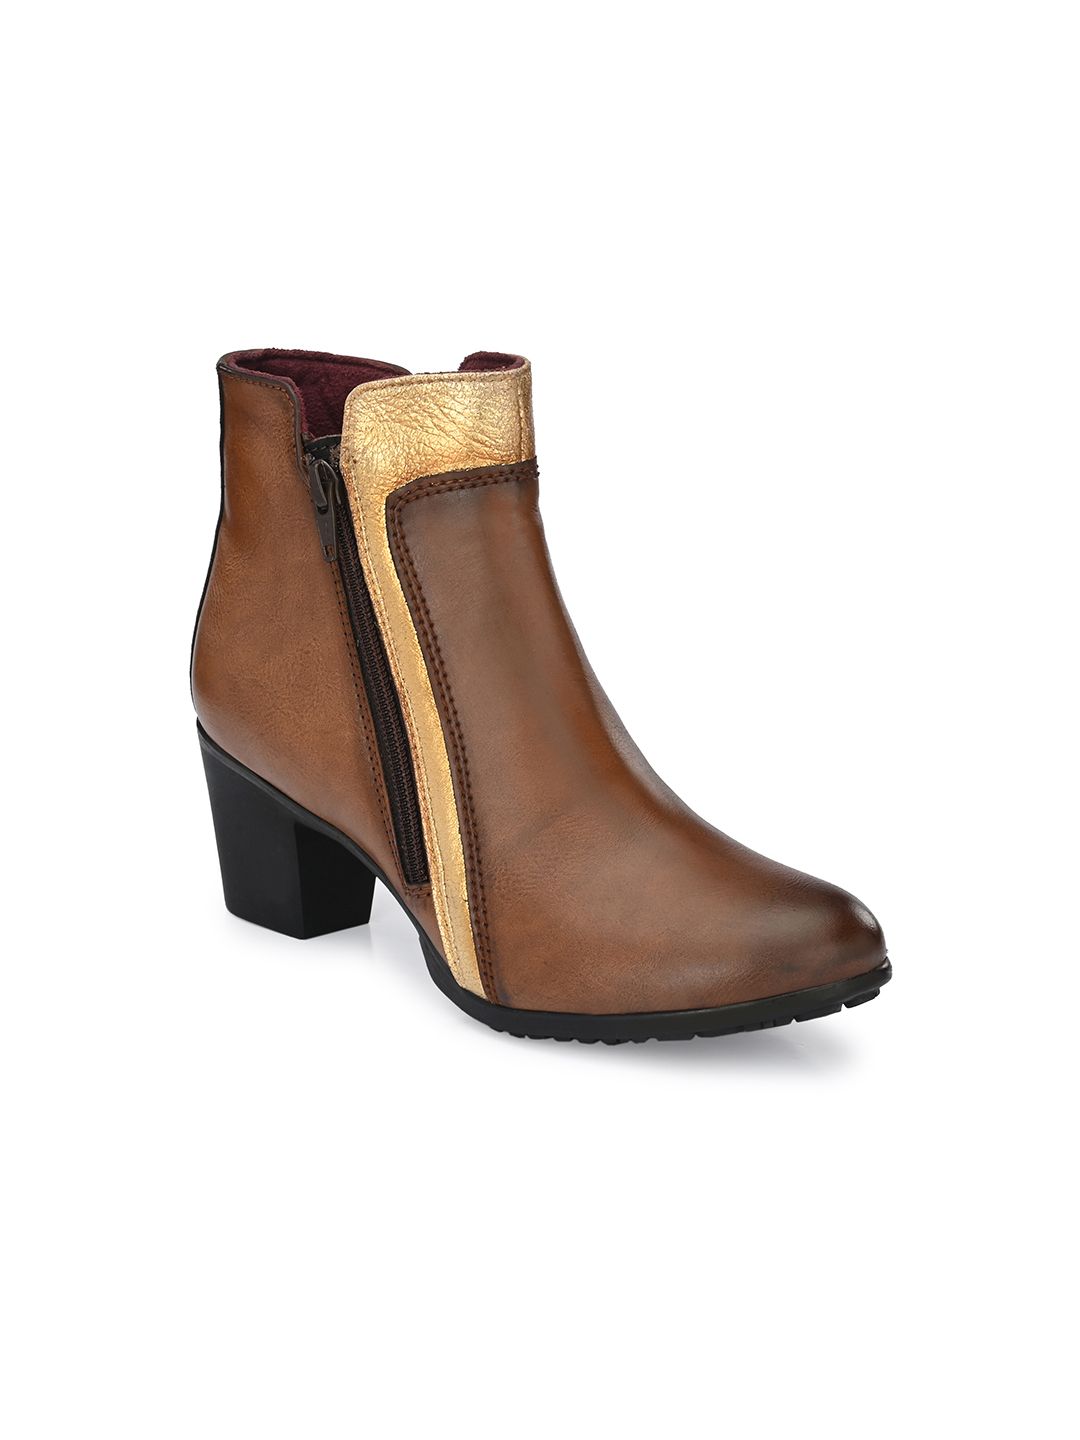 Delize Women Tan Brown & Beige Colourblocked Heeled Boots Price in India